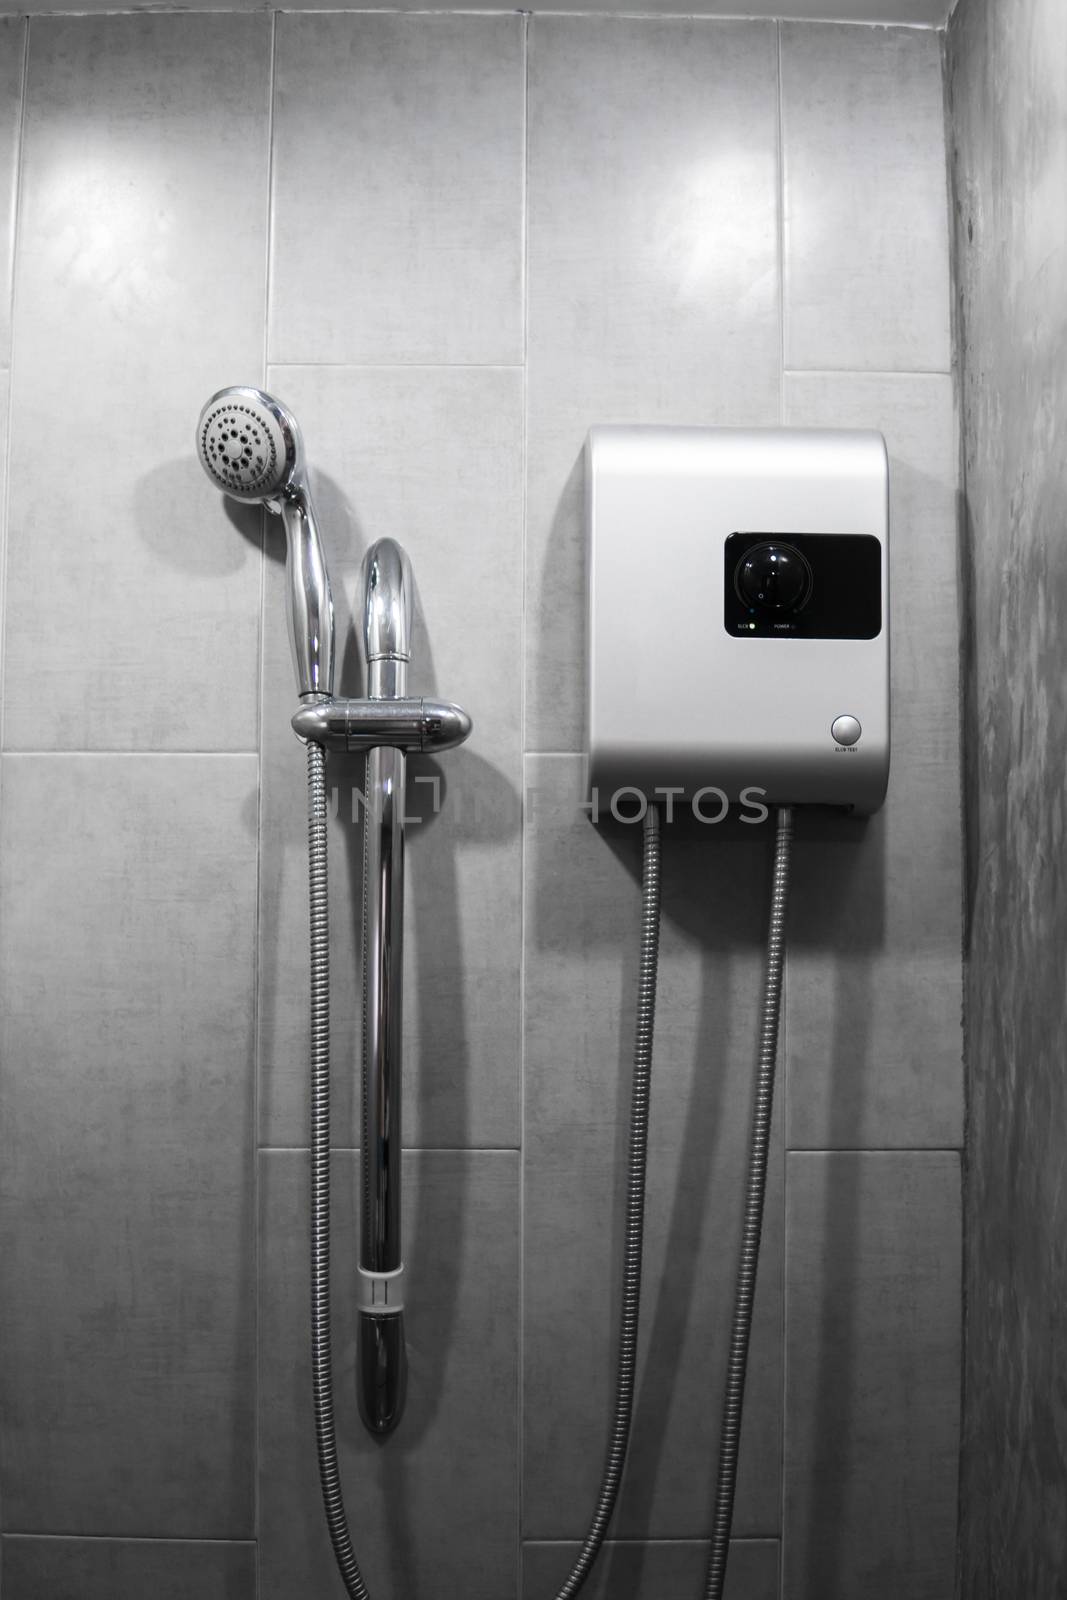 Instant tankless electric water heater installed on grey tile wall with input and output pipe outlet and elcb safety breaker system and silver shower. by vovsht